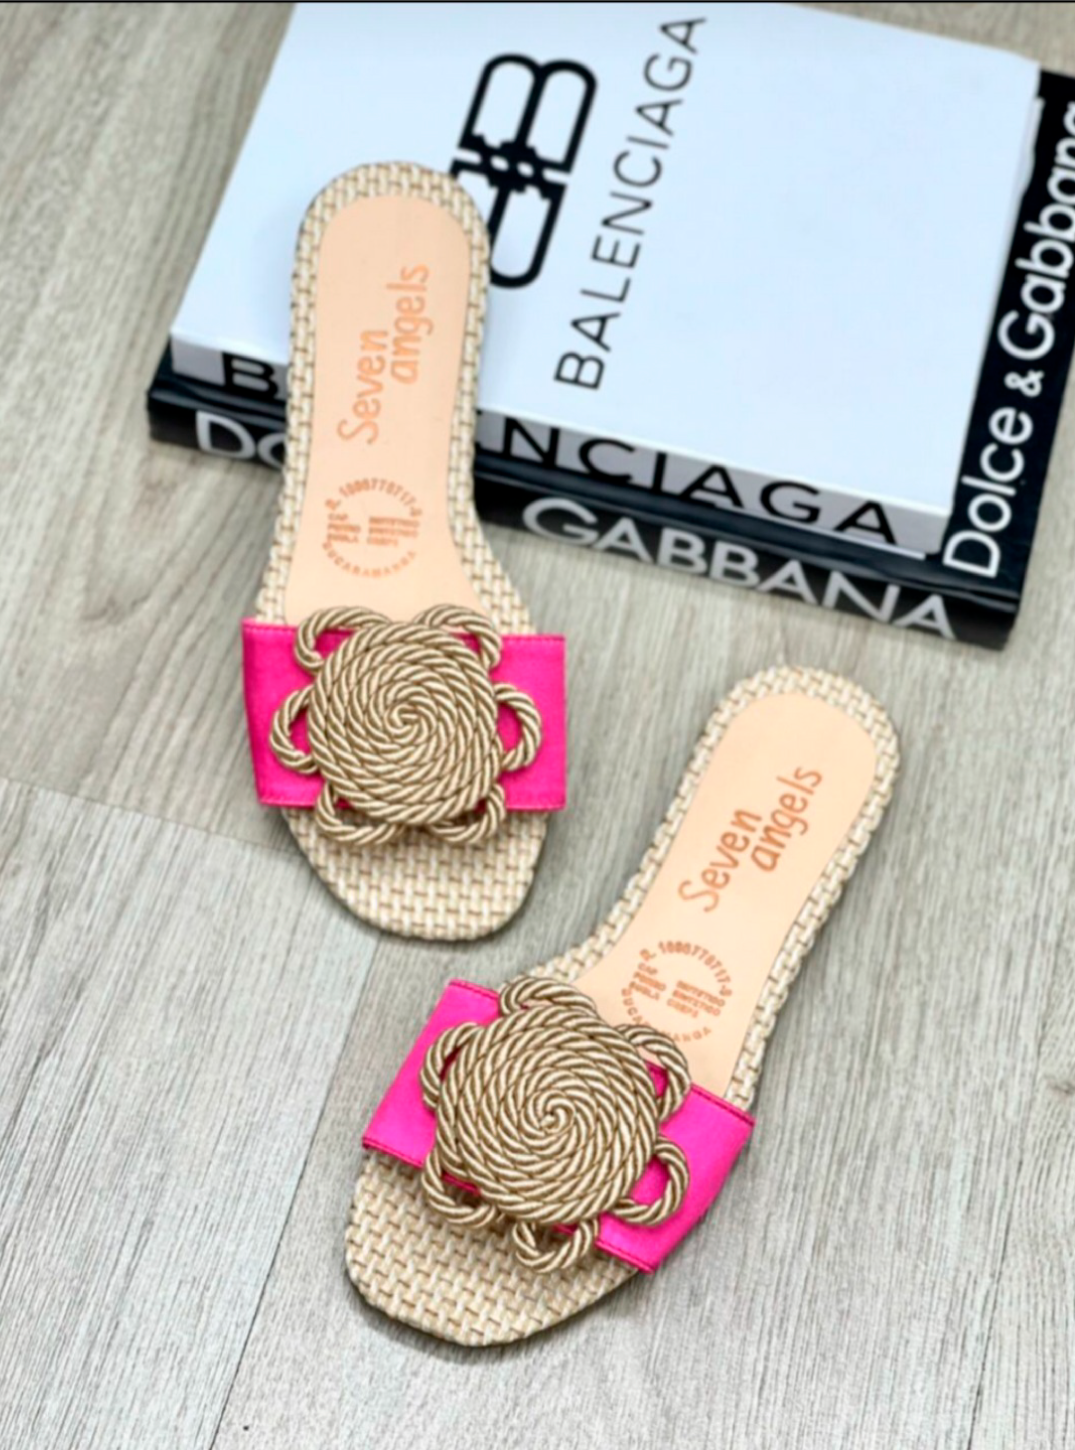 Rose's SANDALS – One love boutique by Adriana